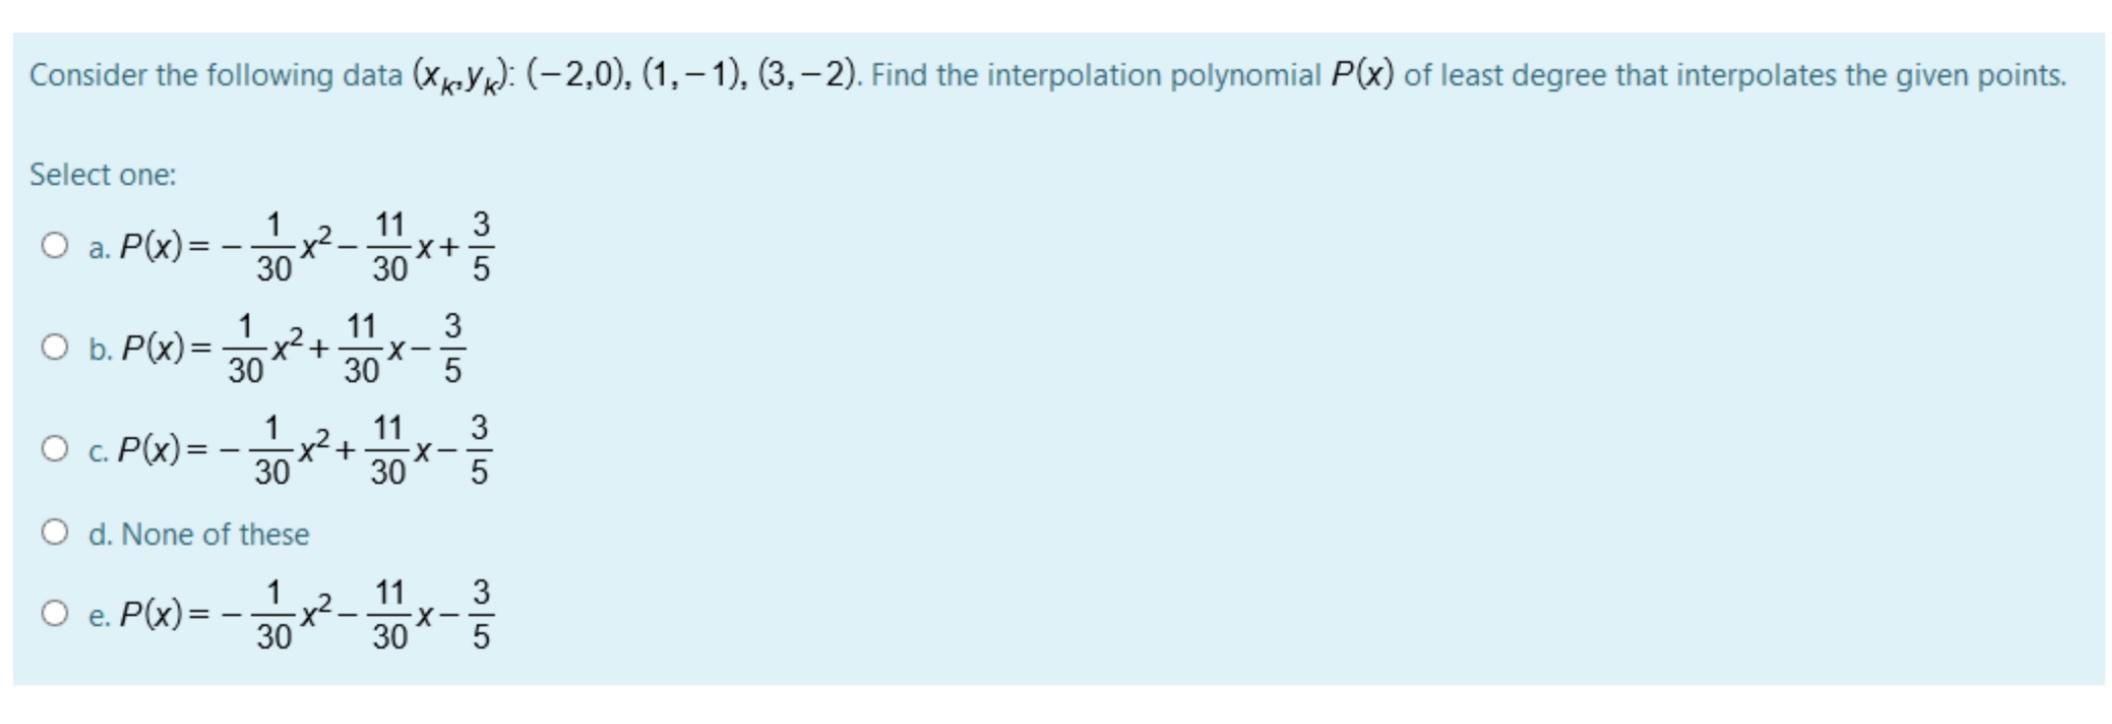 Consider the following data (xYk): (-2,0), (1,– 1), (3, -2). Find the interpolation polynomial P(x) of least degree that interpolates the given points.
|
